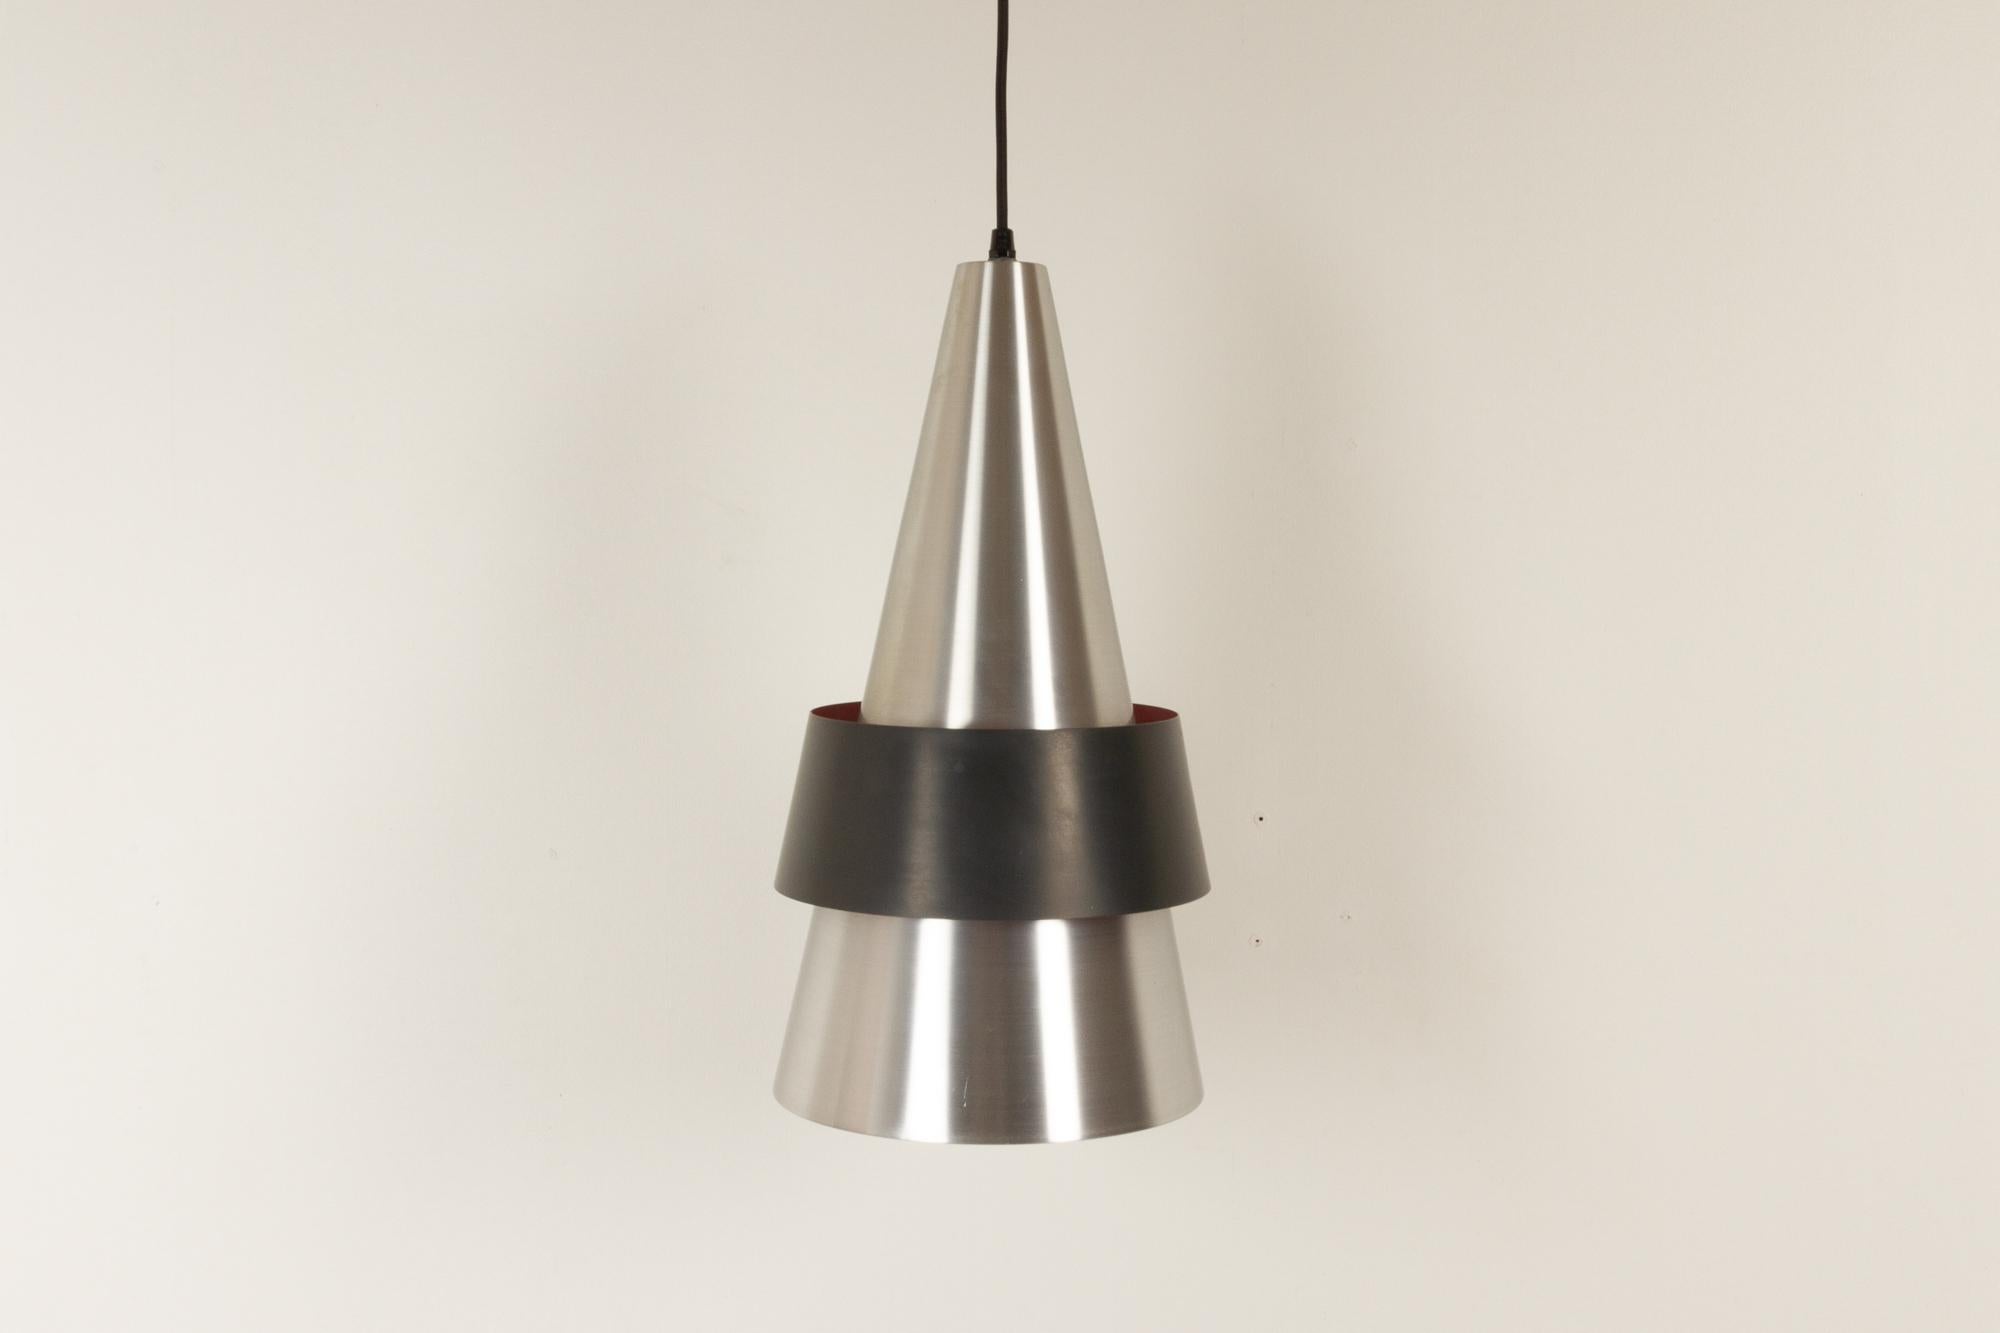 Vintage Danish corona pendant by Jo Hammerborg for Fog & Mørup 1960s
Cone of solid satin aluminum, filament screened by girdle of iron, outside black lacquered, inside light cyclamen.
The Corona pendant gives a characteristic decorative light